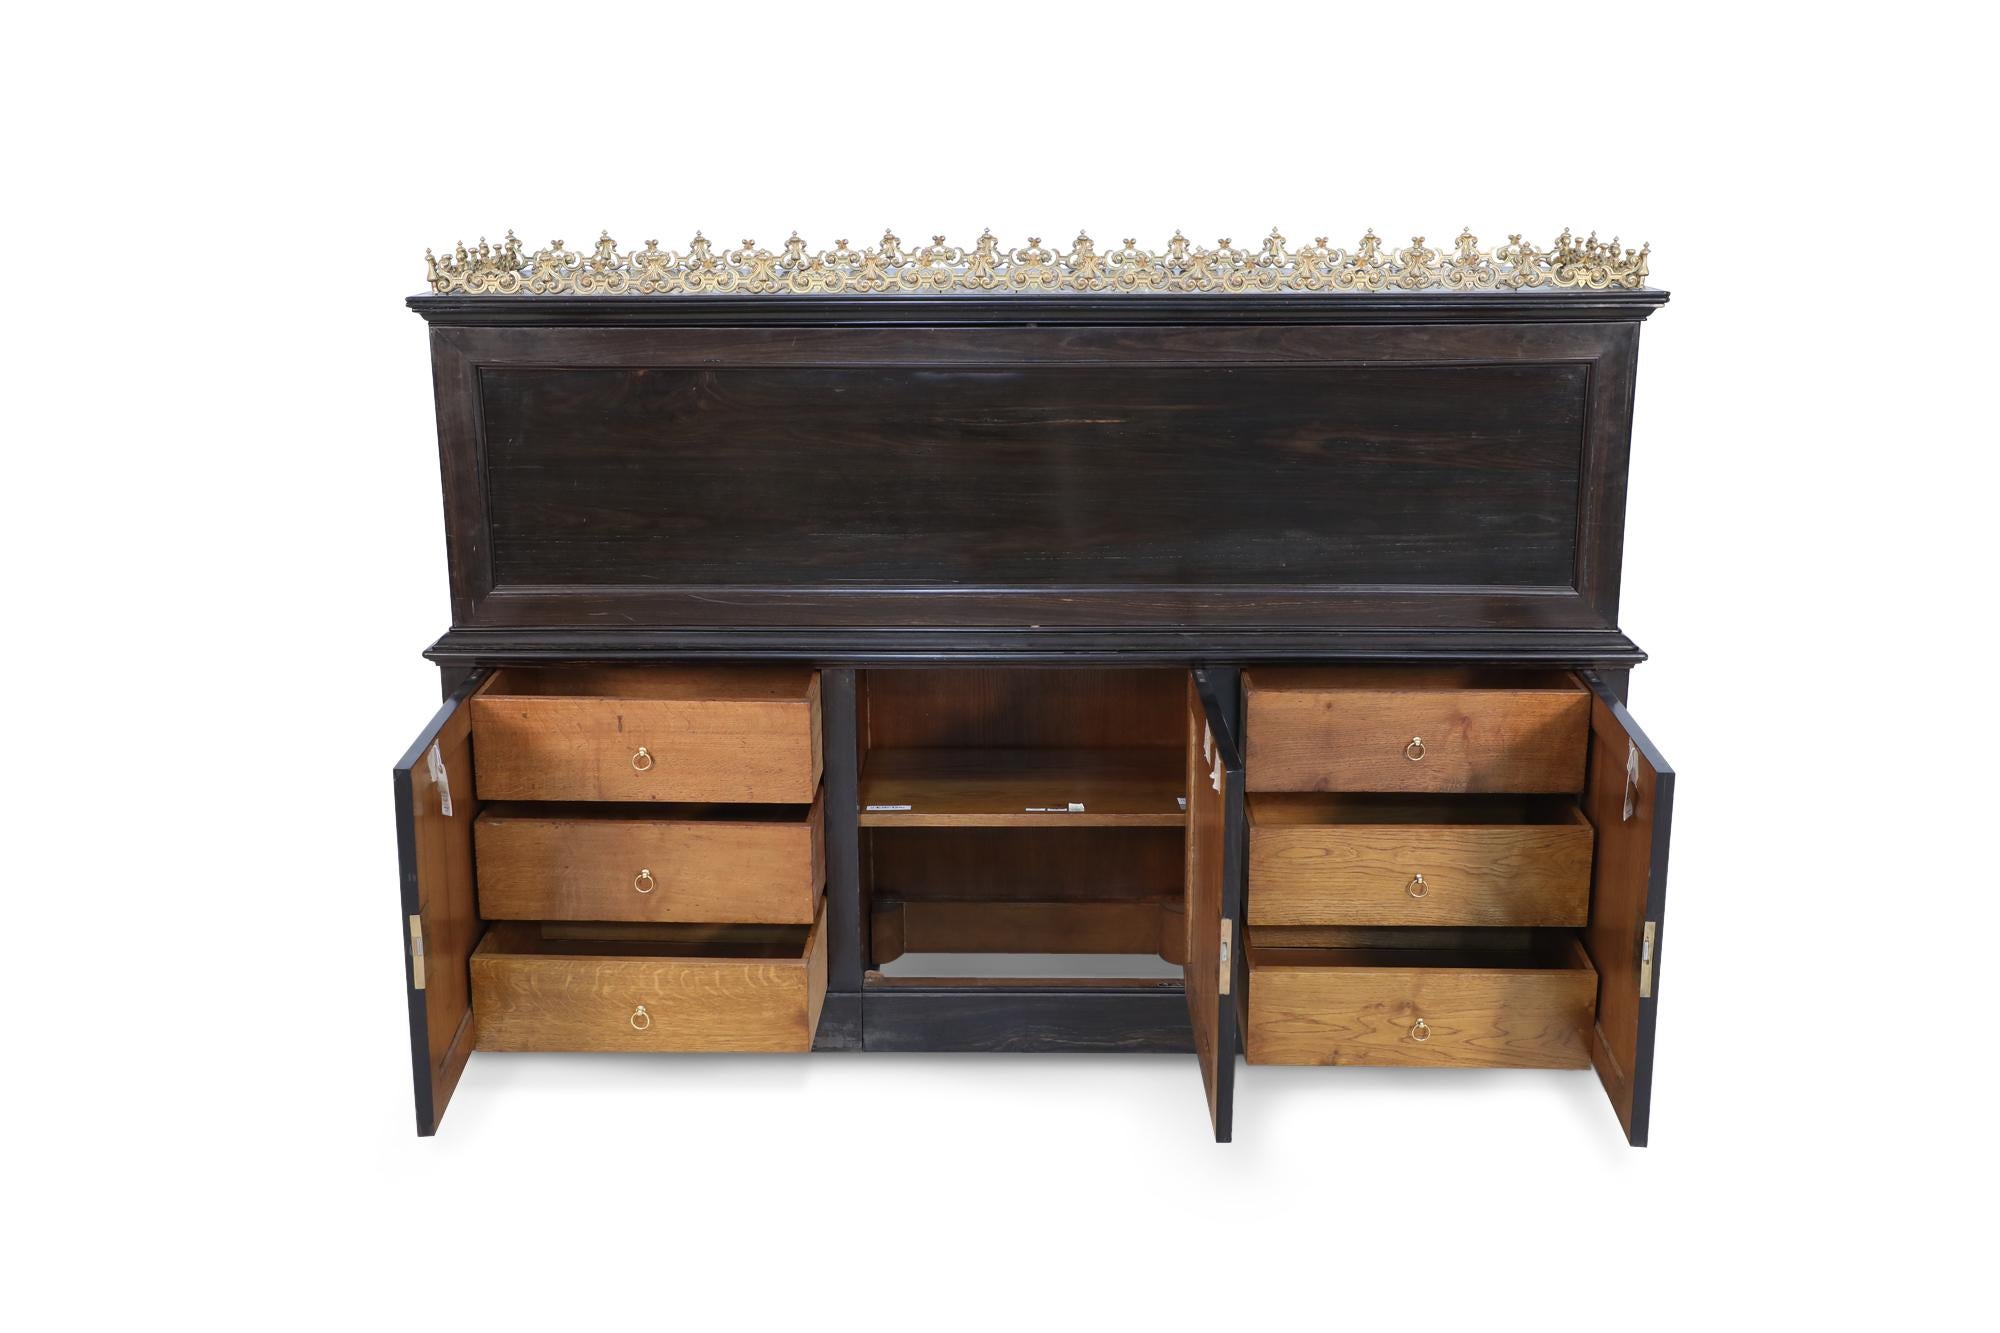 19th Century Empire Style English Roll Top Desk with Bronze Mounts For Sale 6